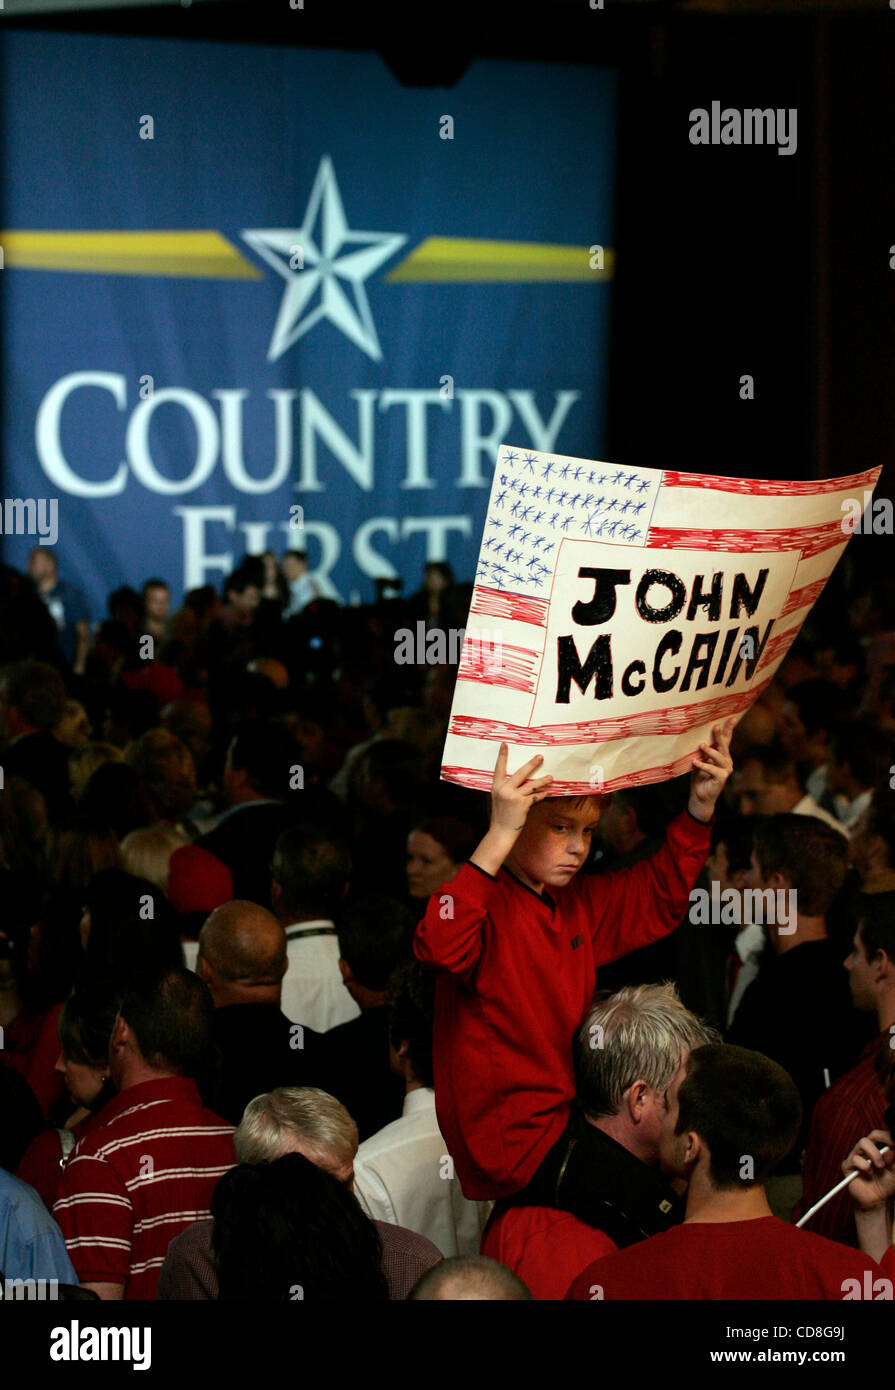 Nov 04, 2008 - Phoenix, Arizona, USA - A young and disappointed supporter of John McCain holds a sign on election night festivities at McCain headquarters on the grounds of the Biltmore Hotel in Phoenix on election day for the 2008 Presidential election. (Credit Image: © Jonathan Alcorn/ZUMA Press) Stock Photo